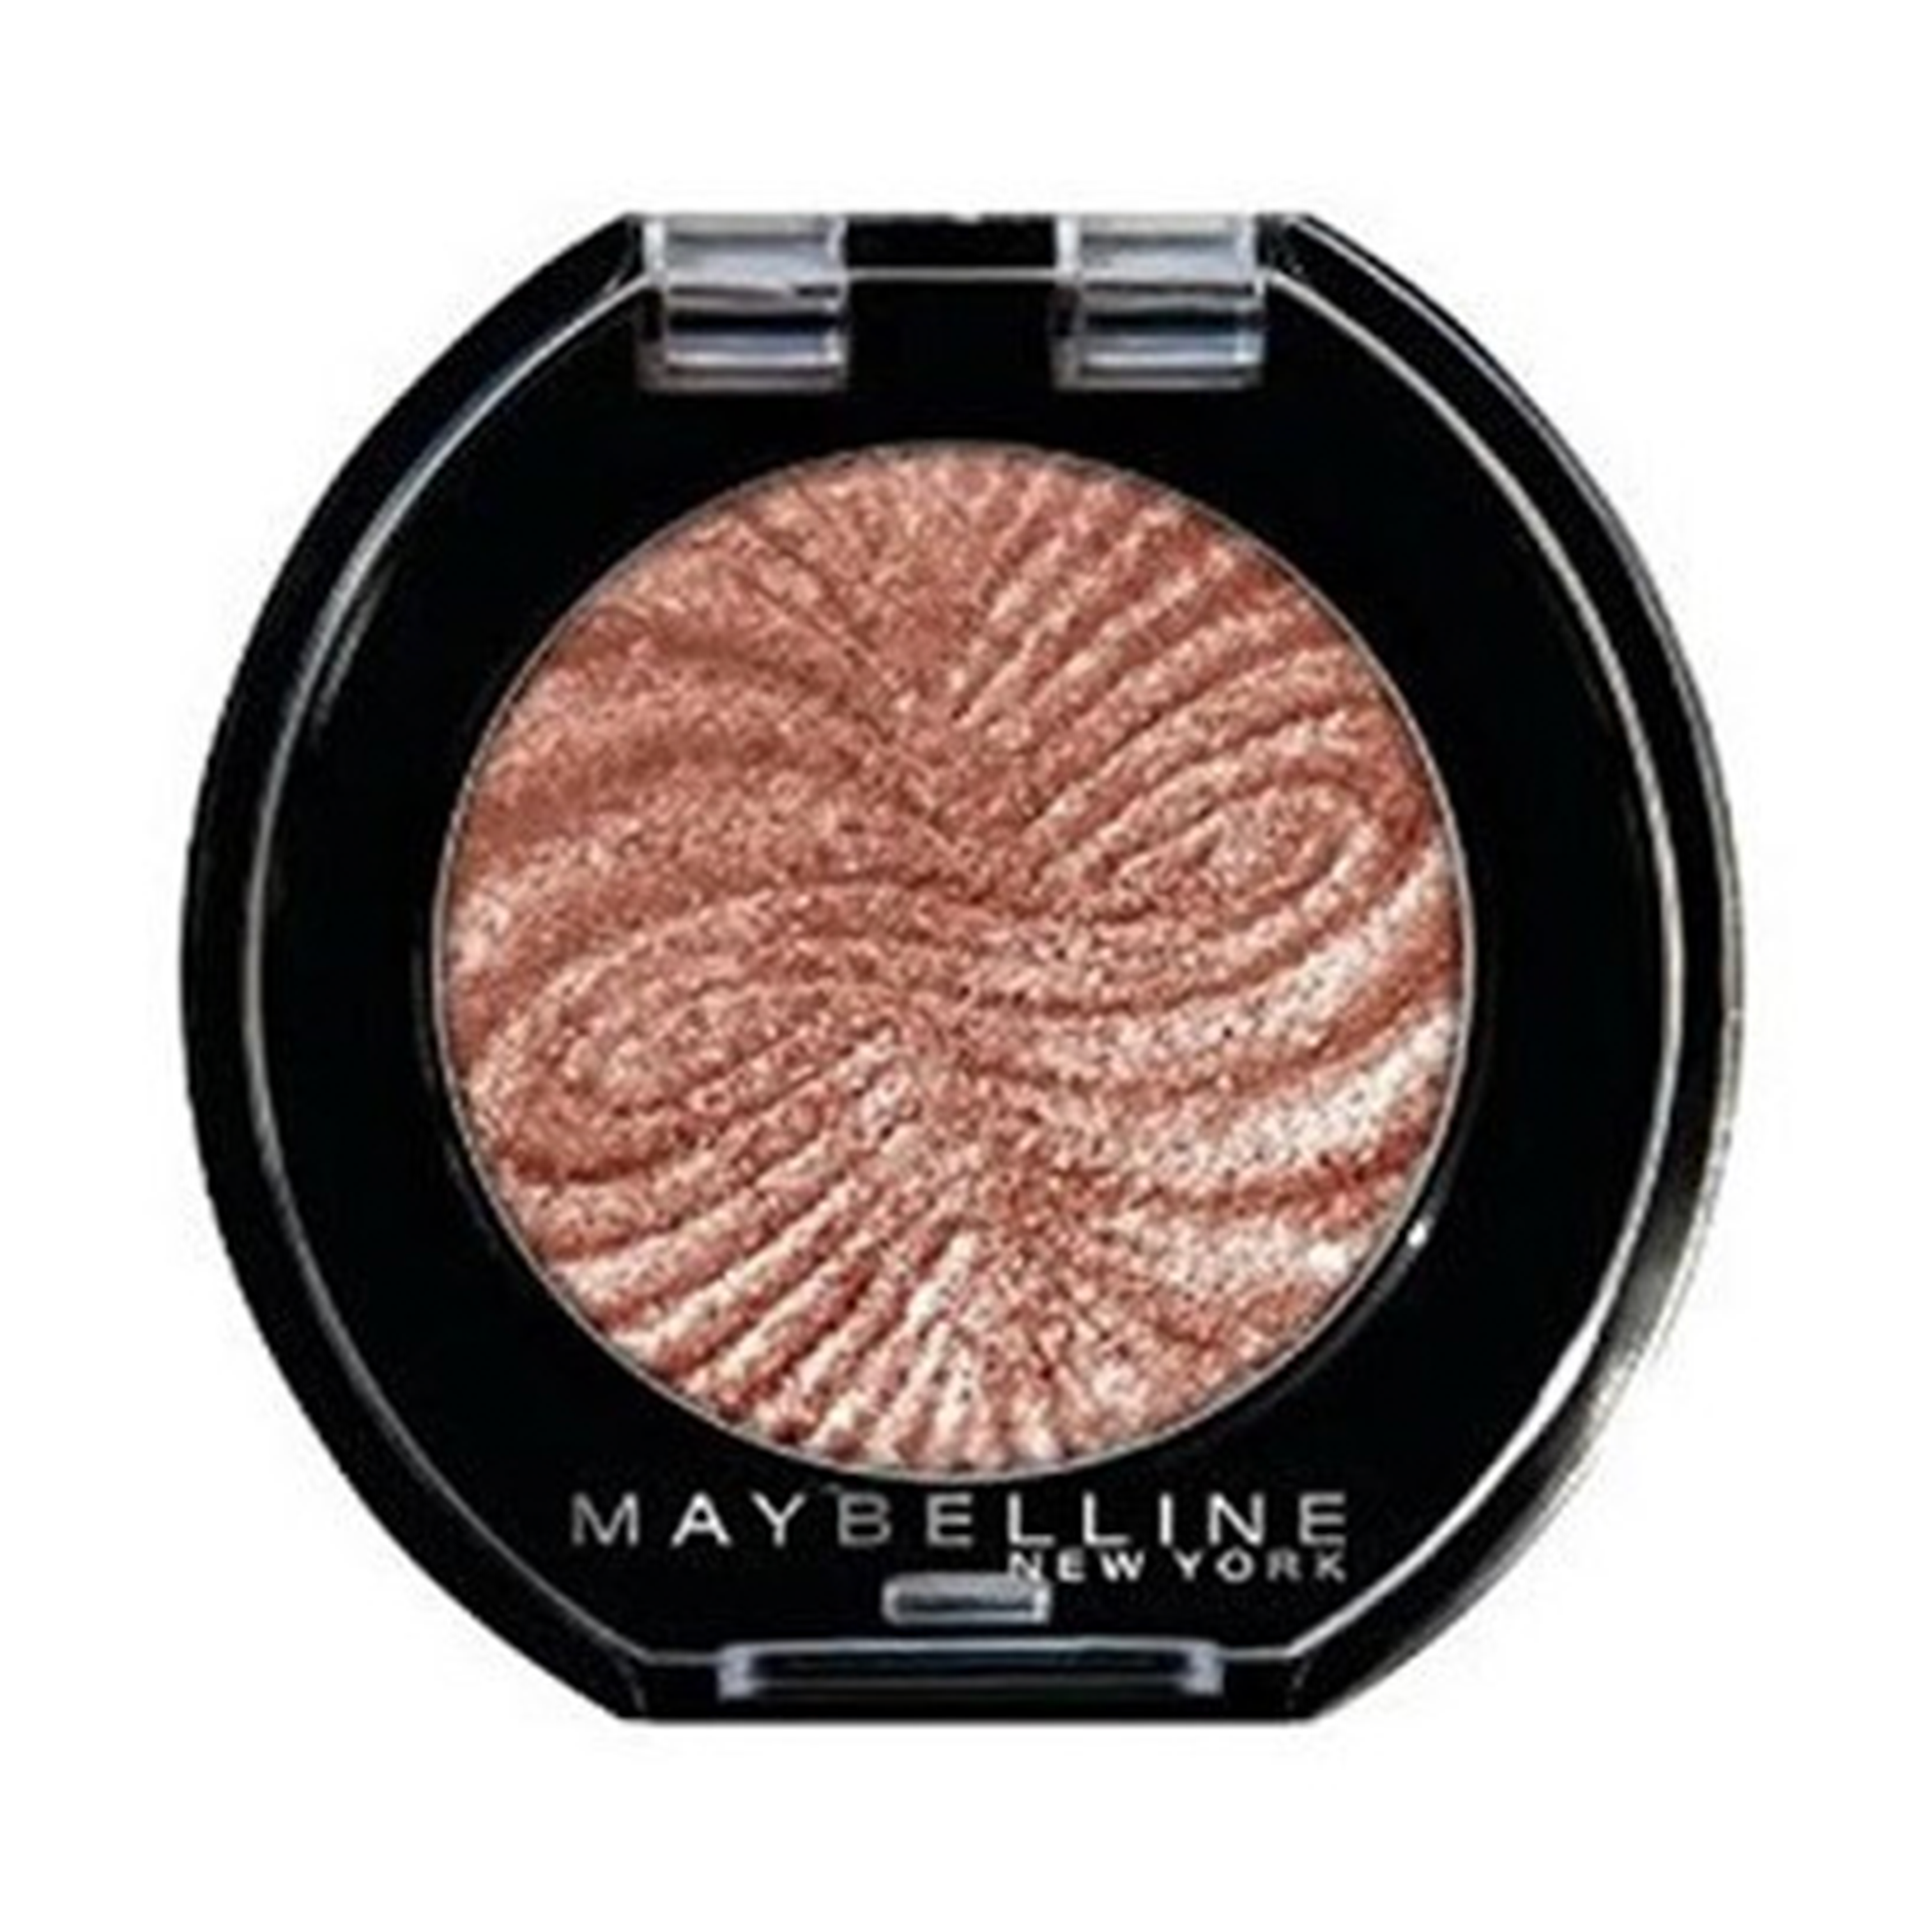 Maybelline Color Show Eyeshadow - 23 Copper Fizz